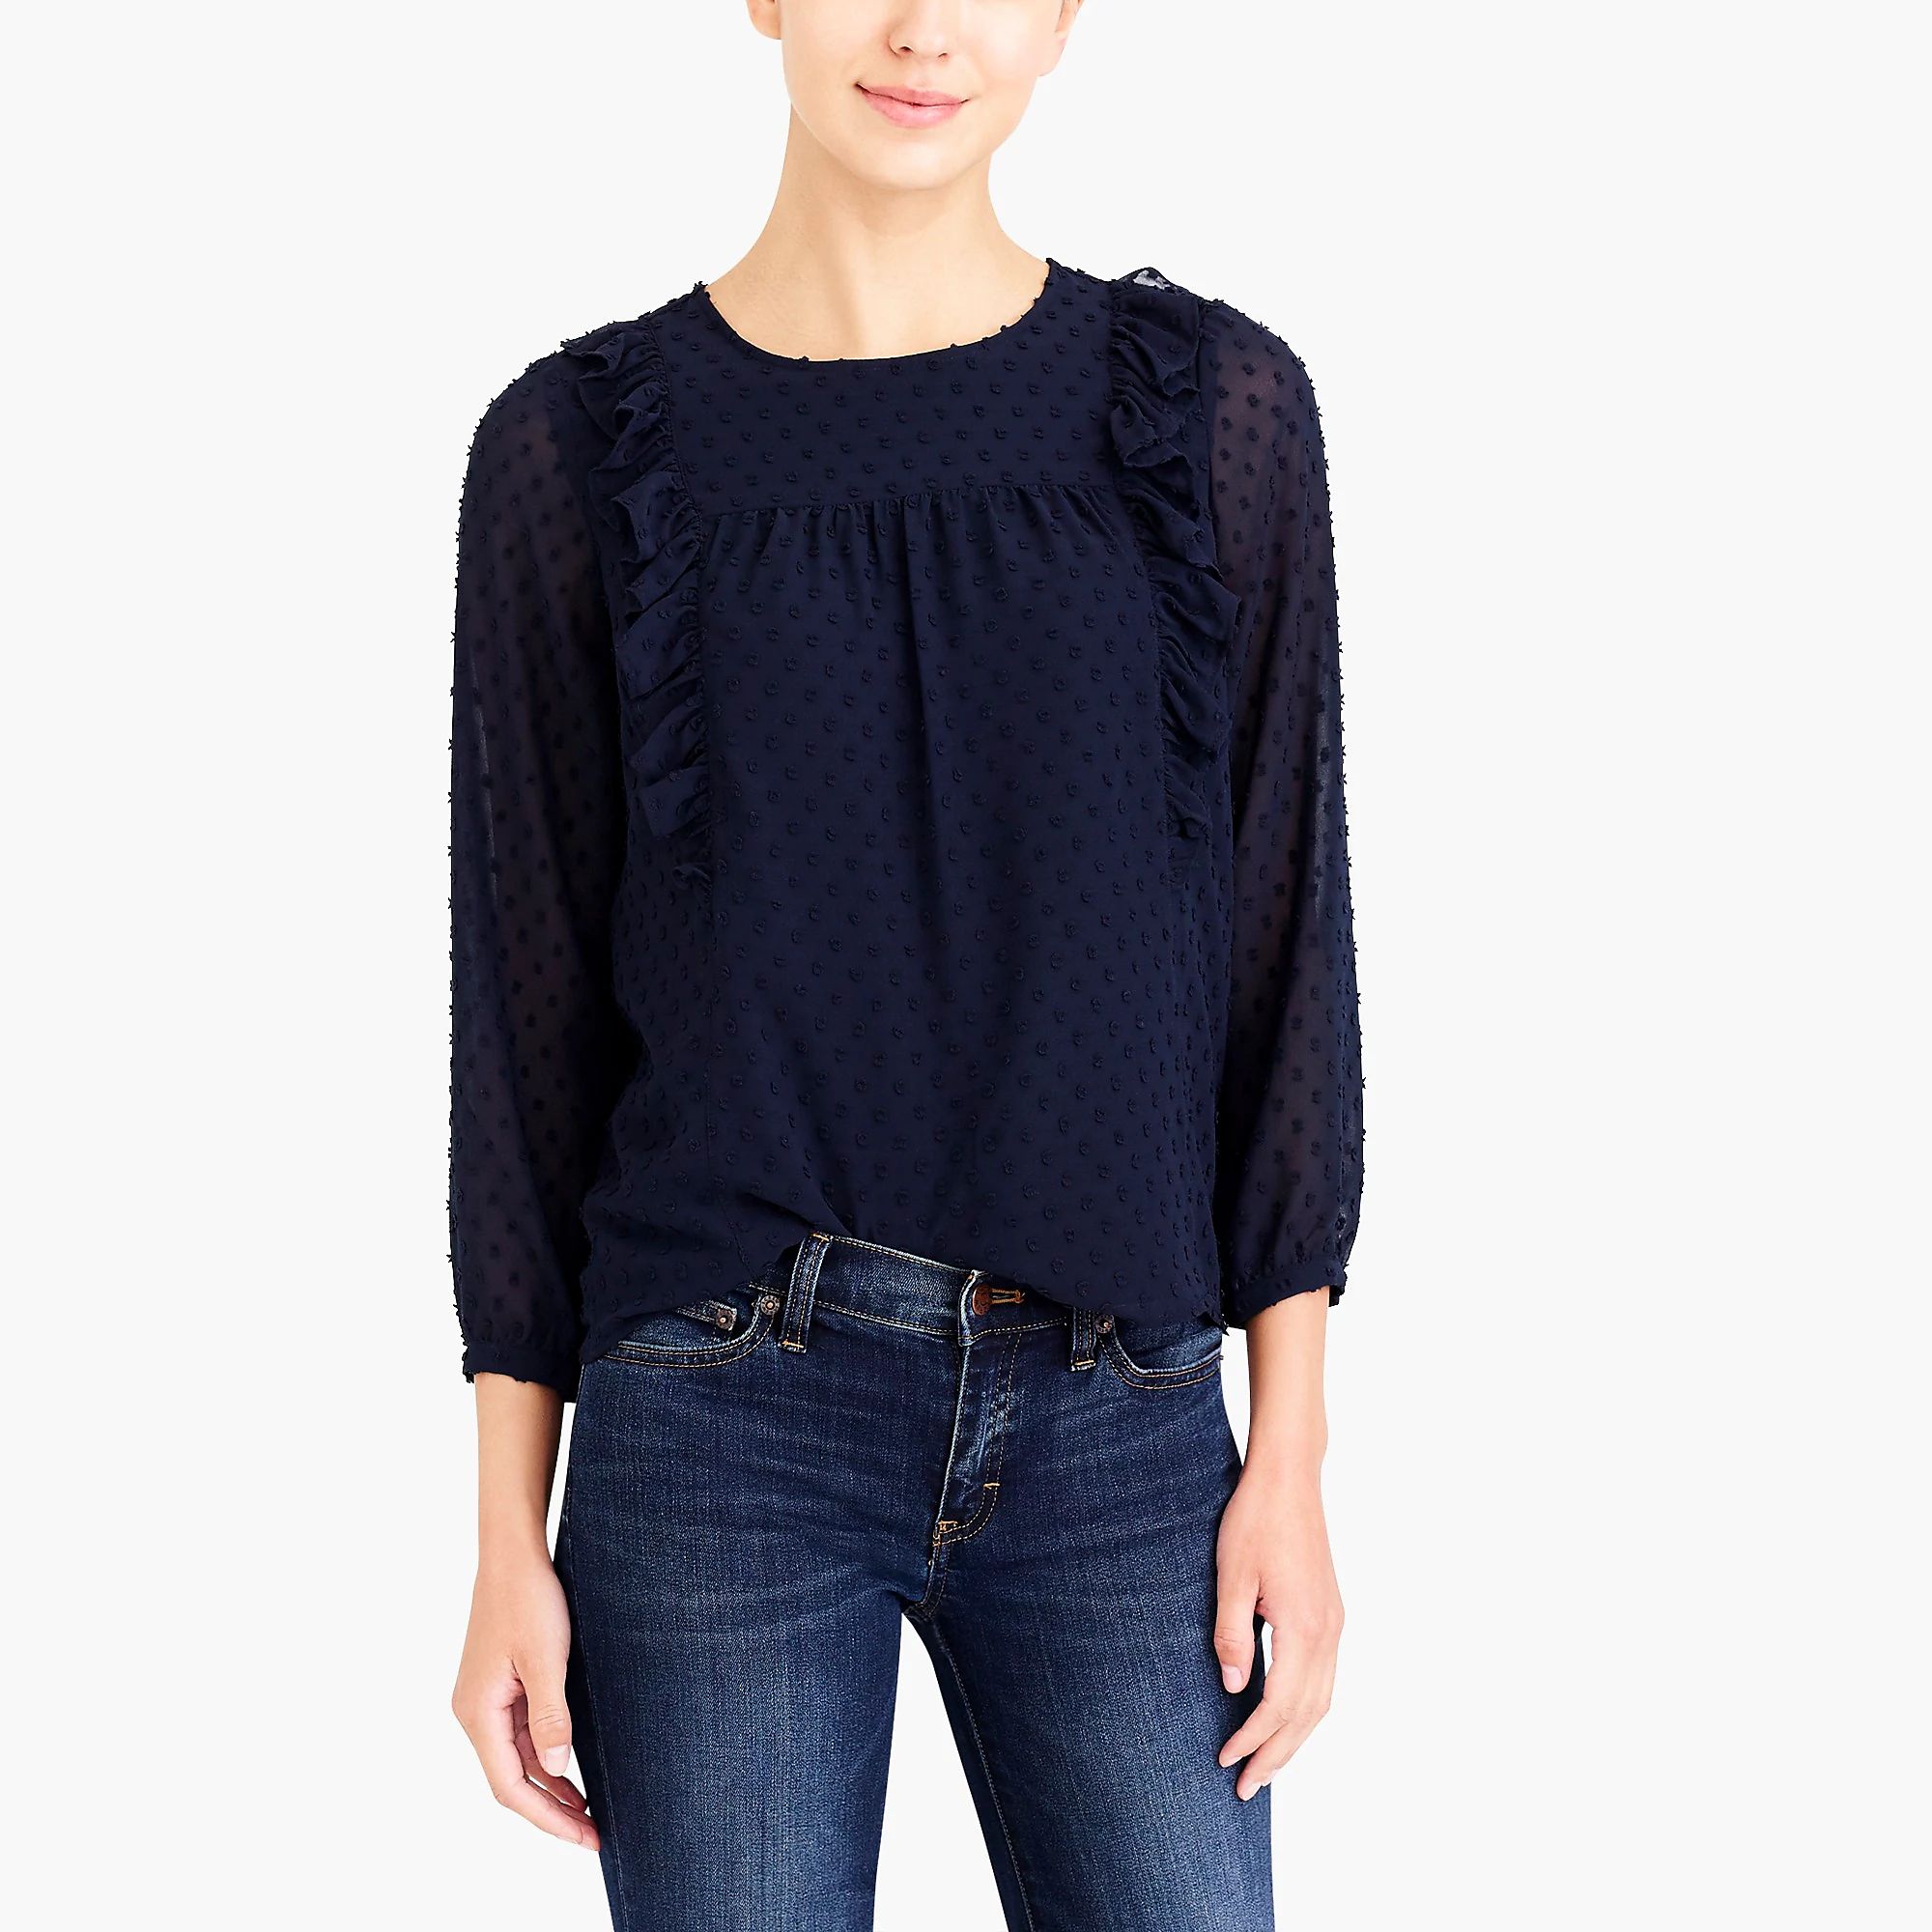 Ruffle front top in clip dot | J.Crew Factory